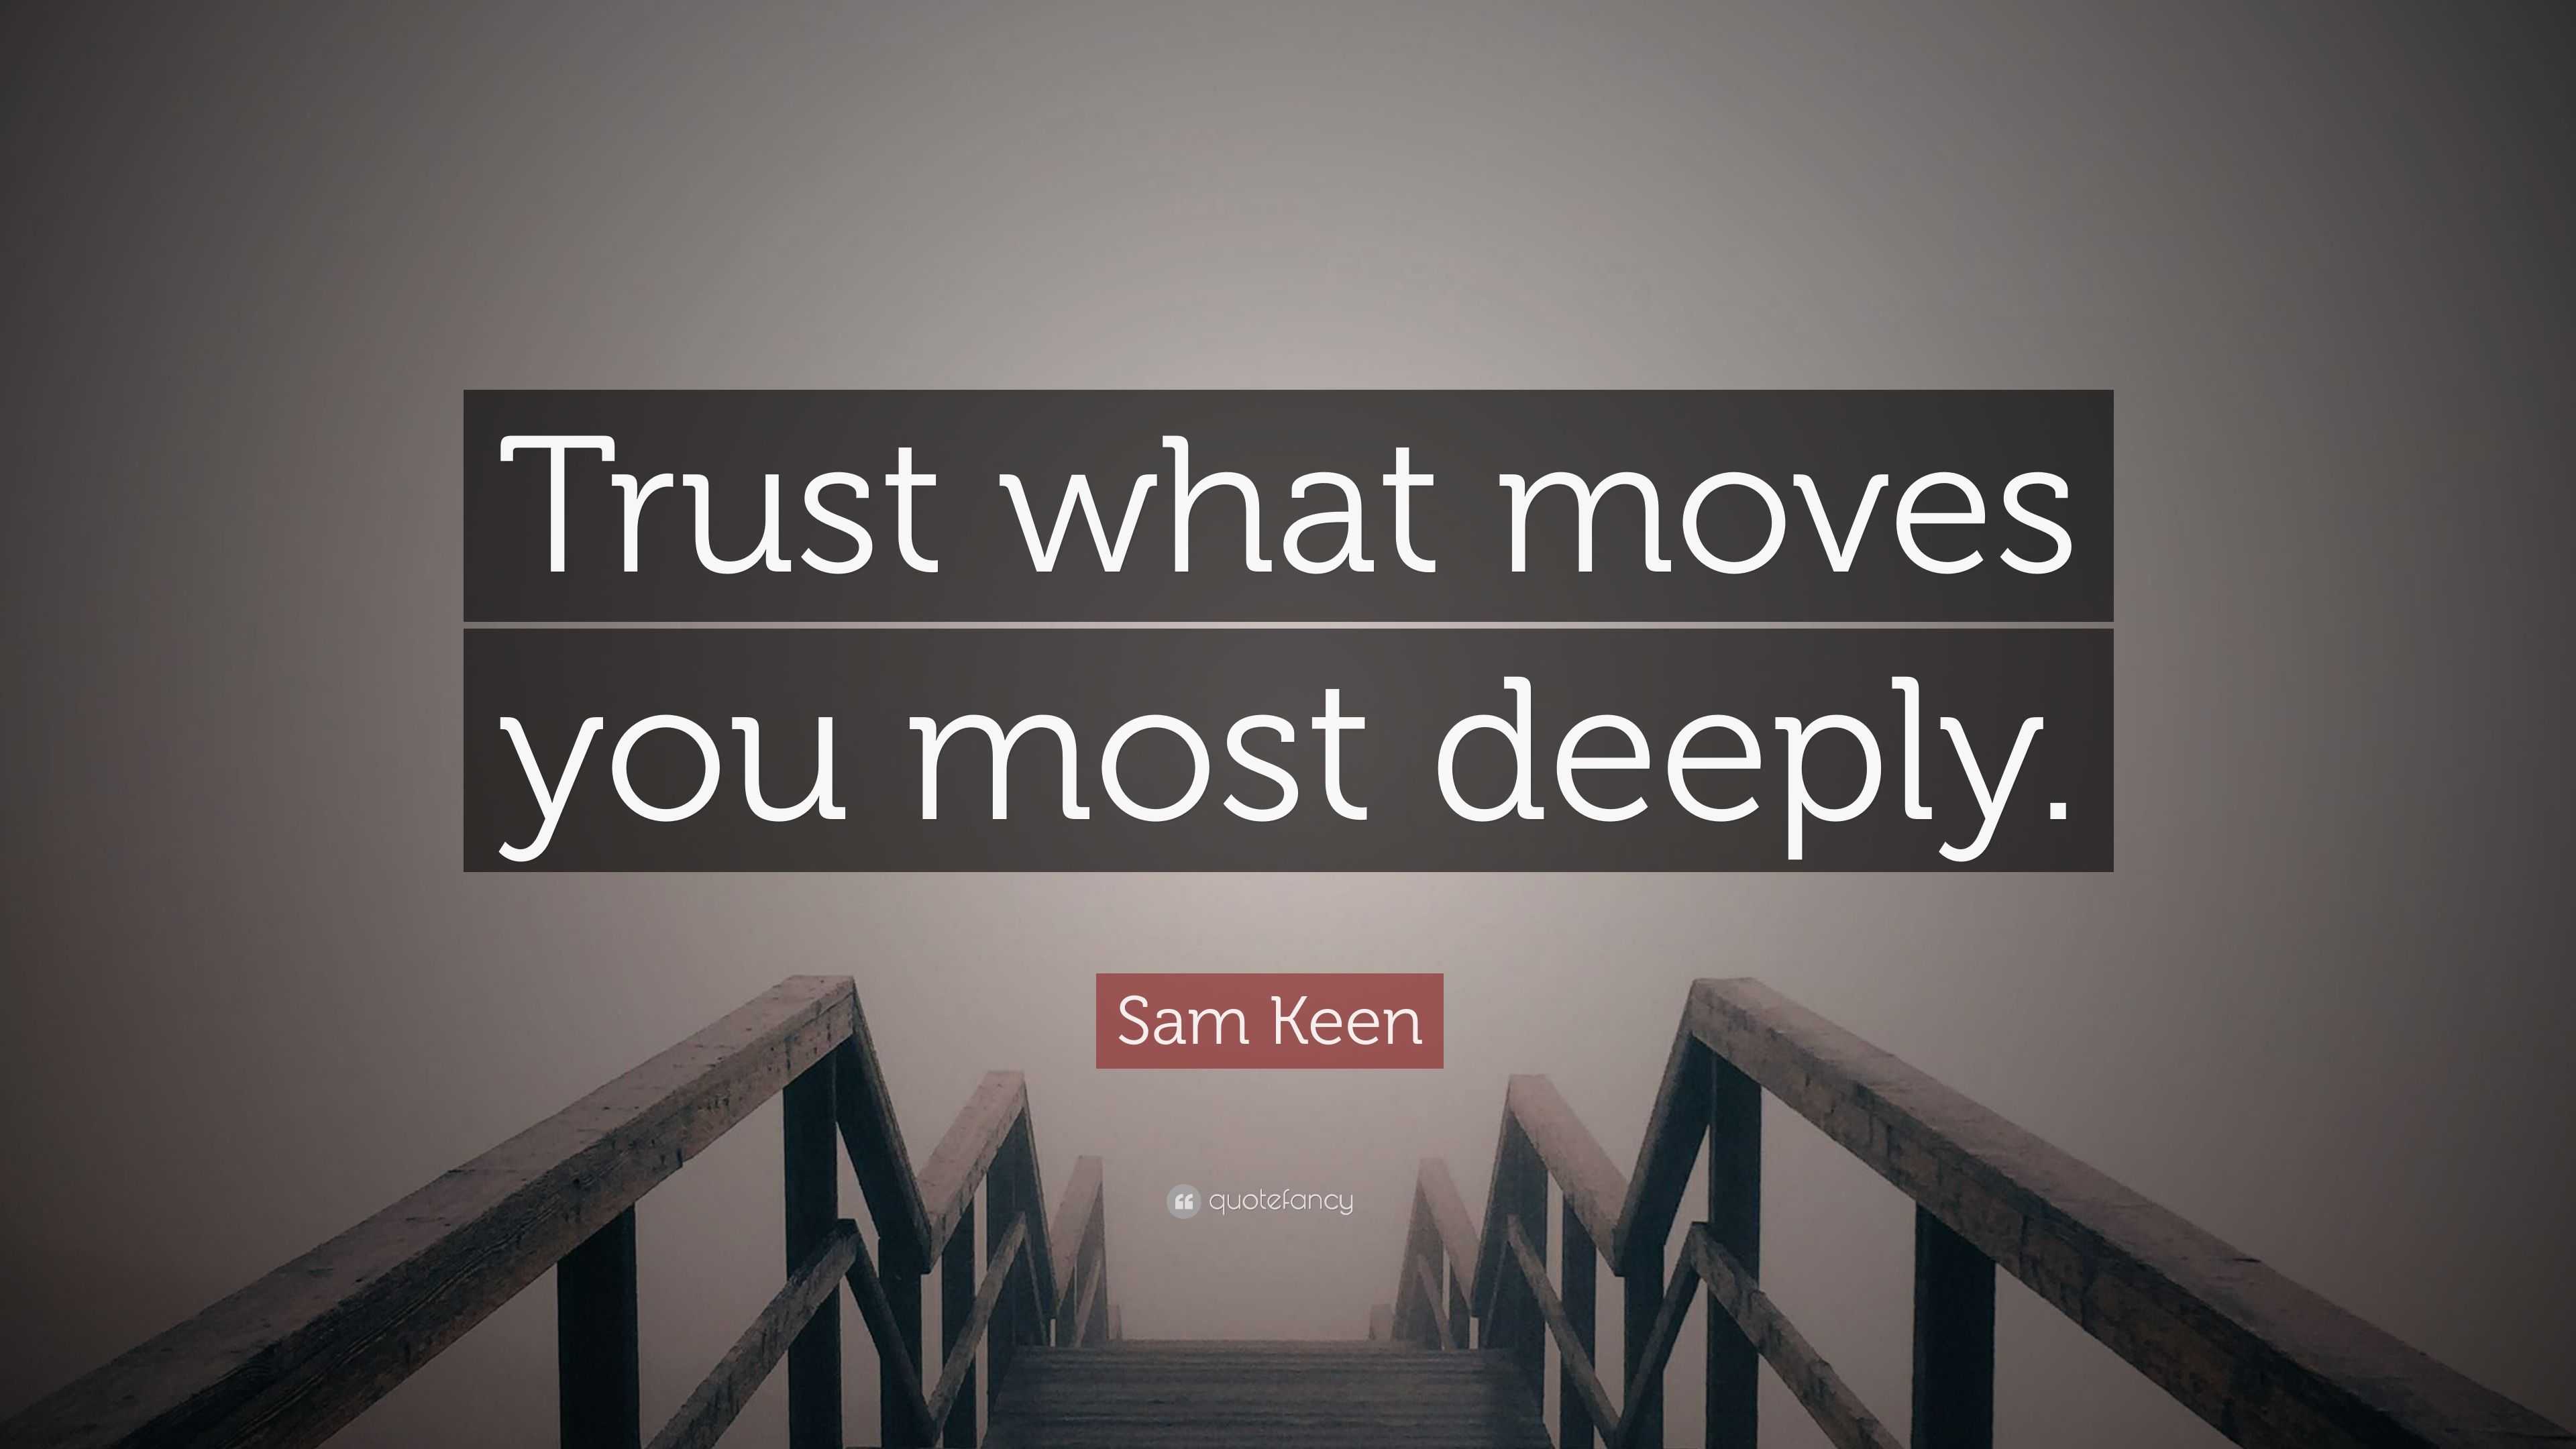 Sam Keen Quote: "Trust what moves you most deeply."